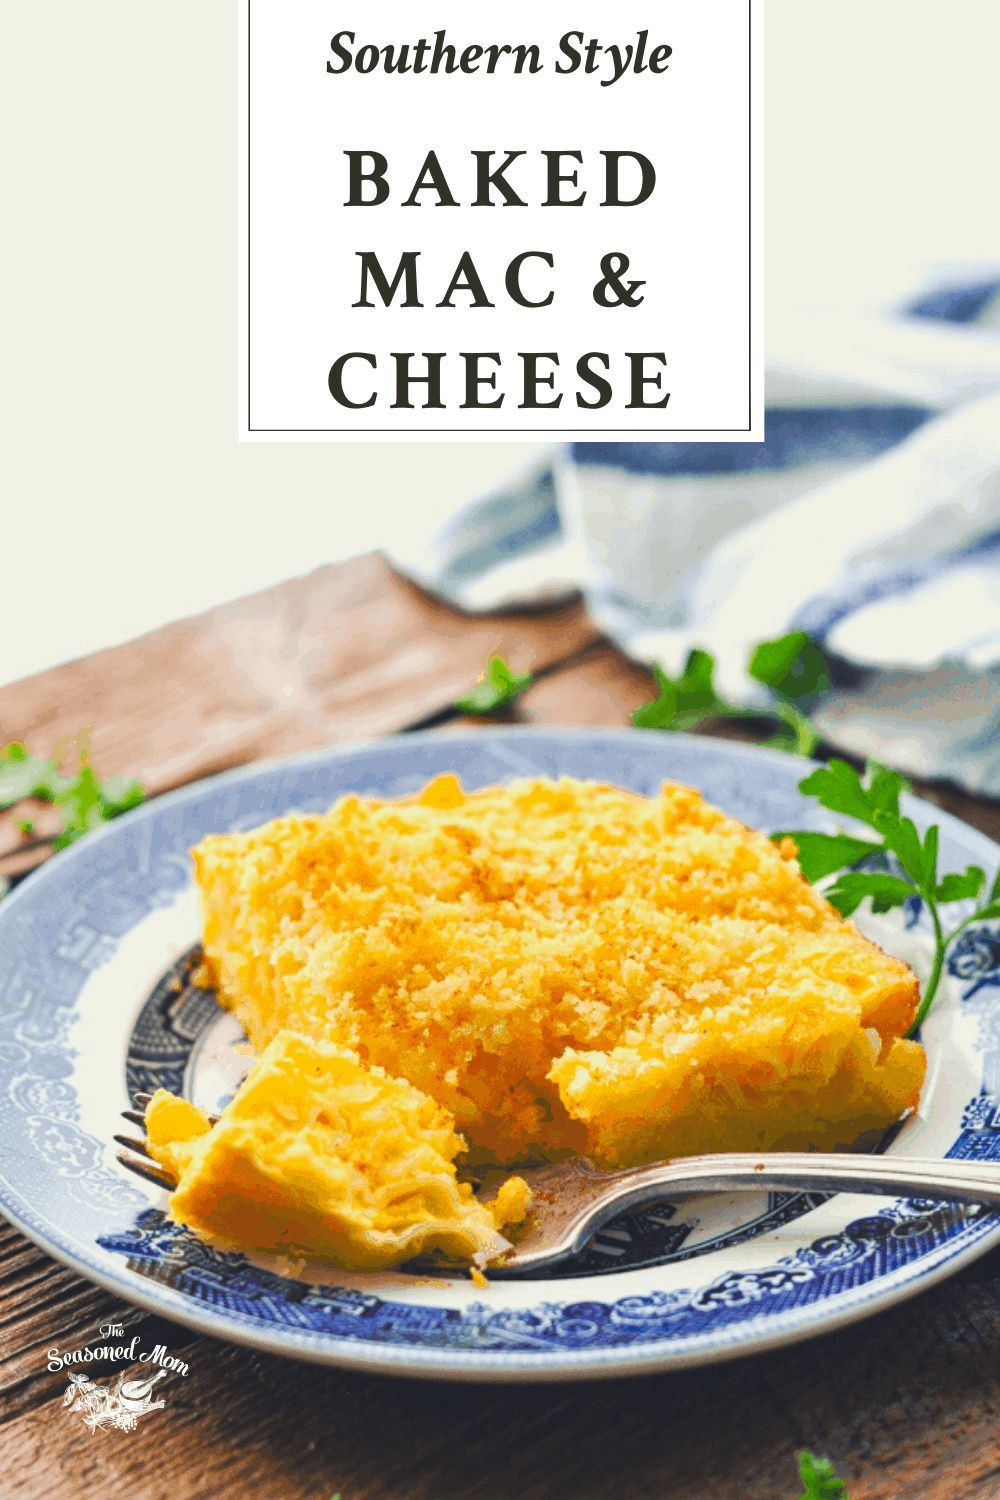 Southern Baked Macaroni And Cheese With Bread Crumbs
 Southern Baked Macaroni and Cheese Recipe